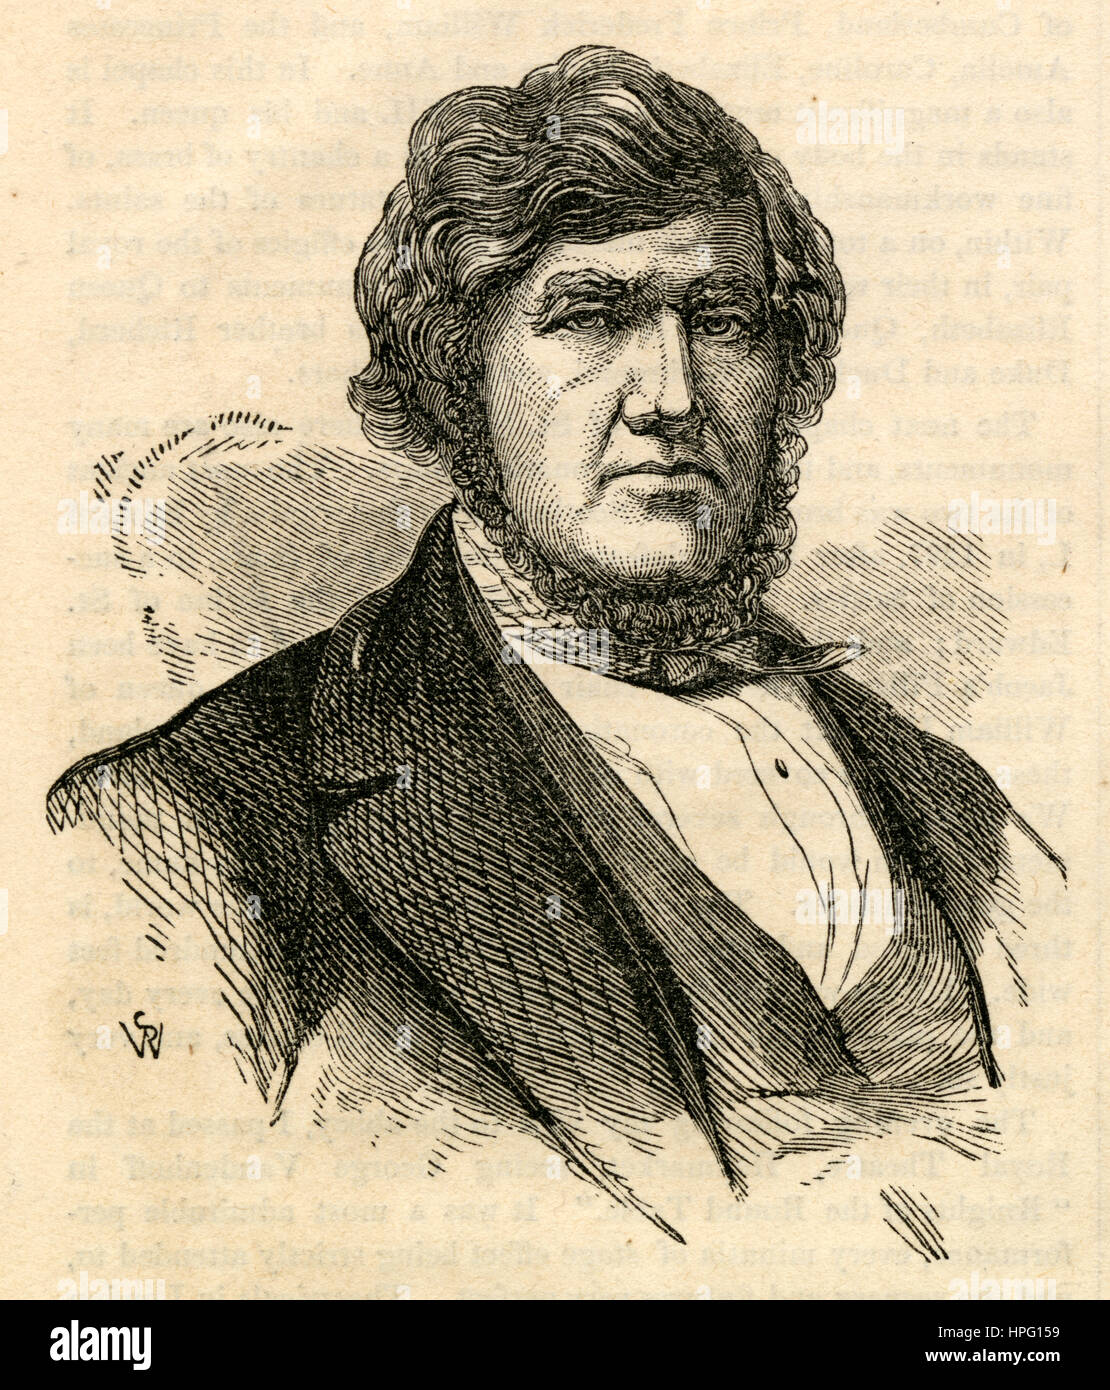 Antique 1854 engraving, George Law. George Law (1806-1881) was an American financier from New York. SOURCE: ORIGINAL ENGRAVING. Stock Photo